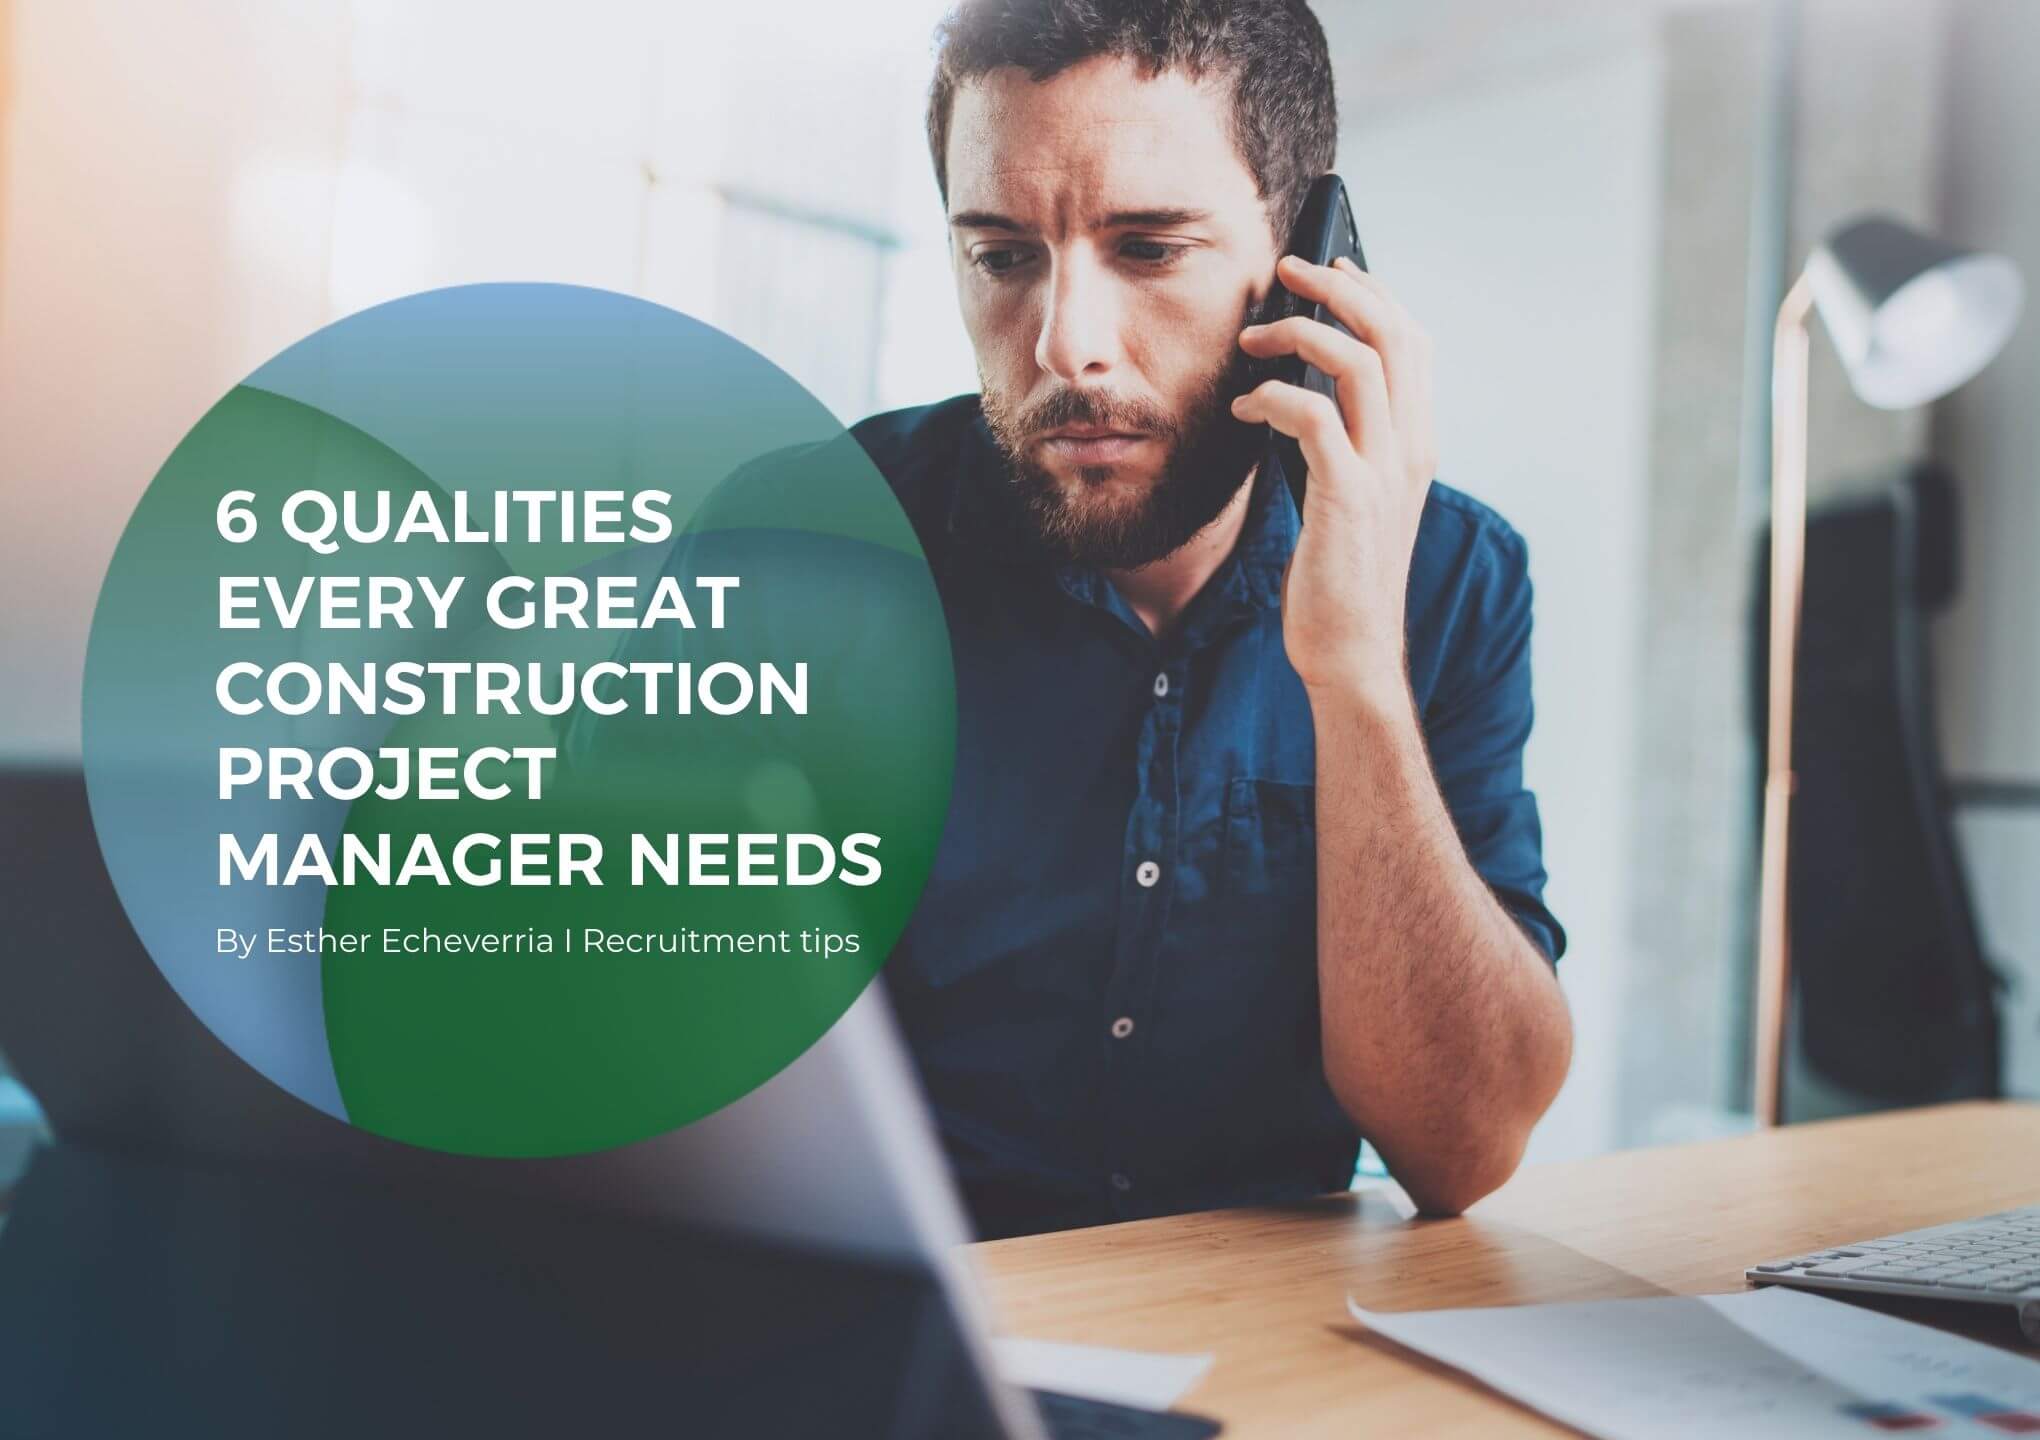 5 must-have qualities every great construction project manager needs